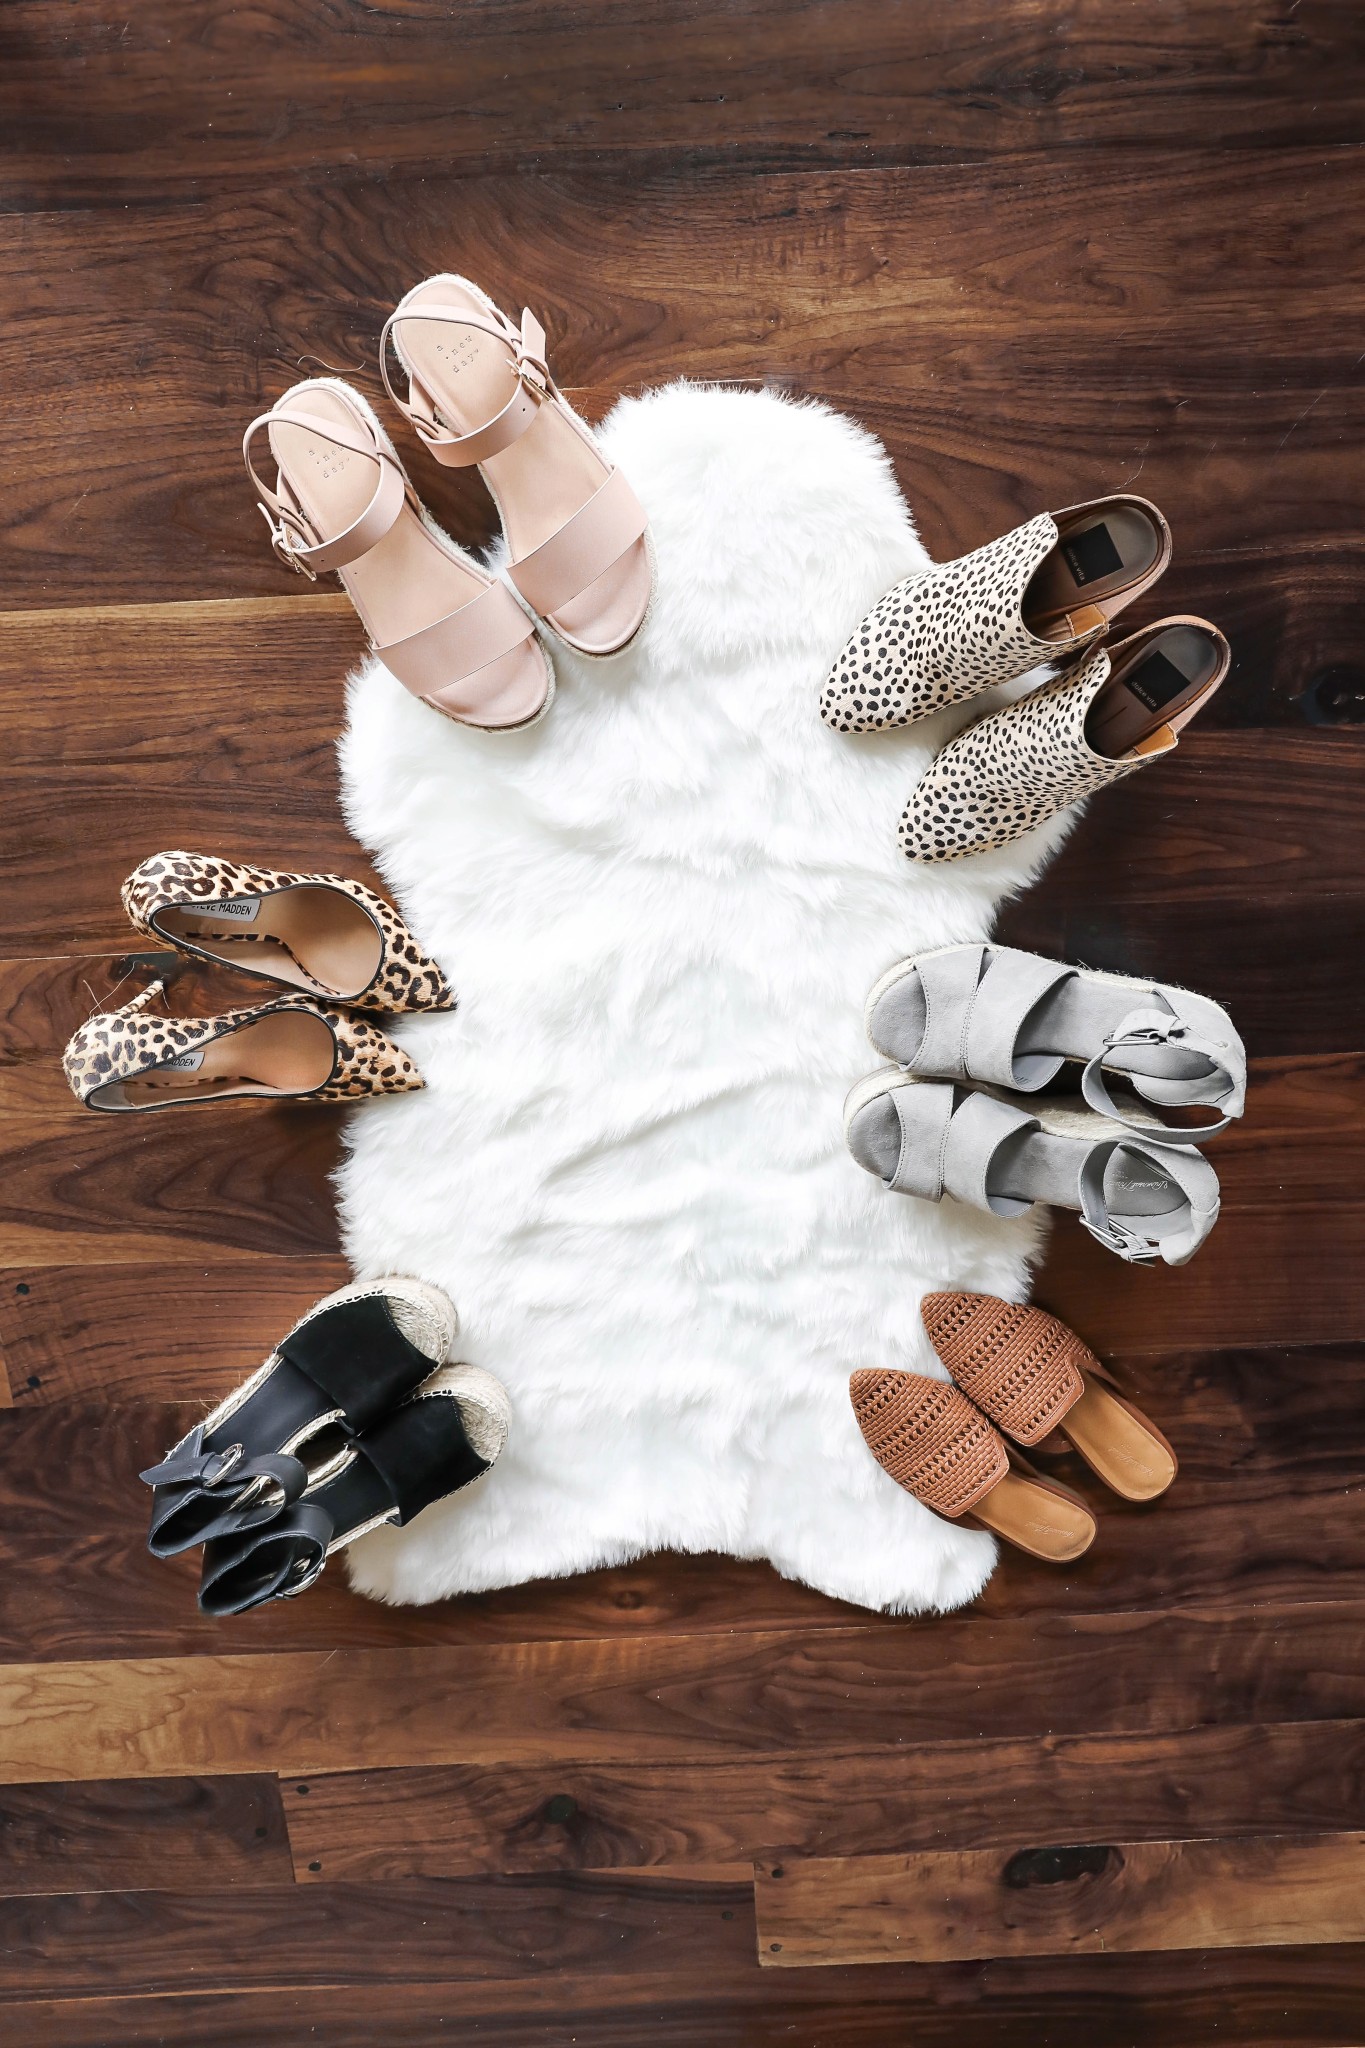 Spring shoe roundup 2019! All the cutest sandals, leopard heels, wedges, sneakers and more! All from target and Nordstrom! The cutest boutique photo Inso on white rugs! Details on fashion blog daily dose of charm by lauren lindmark